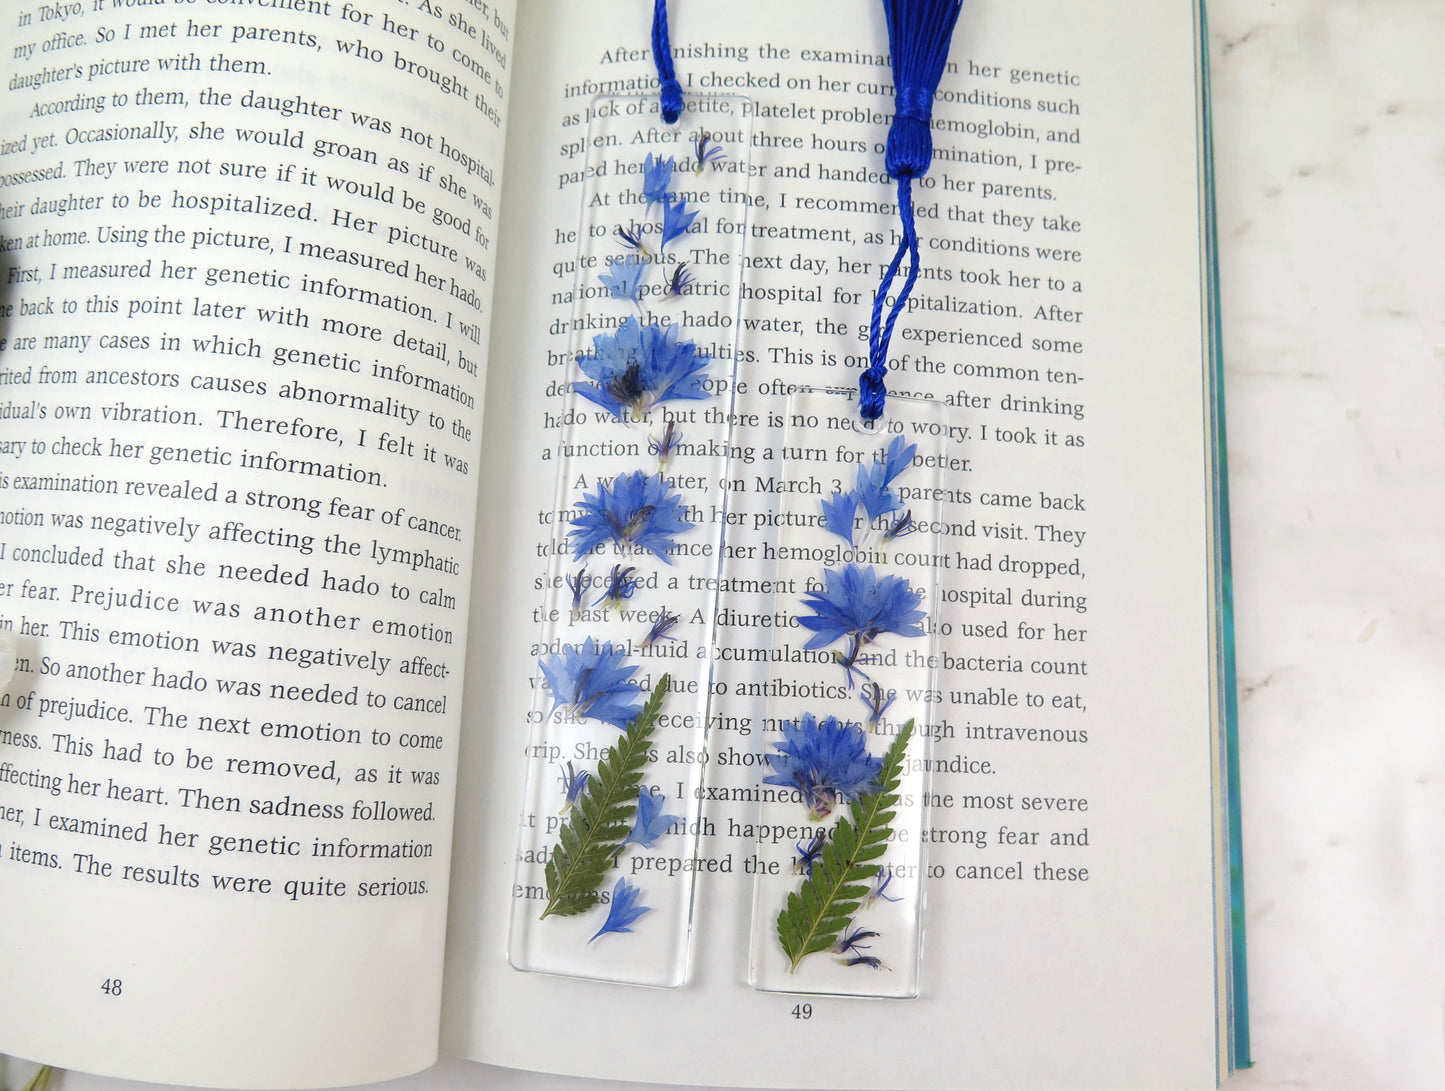 Pressed flowers page marker - Dried flowers resin bookmark with tassel